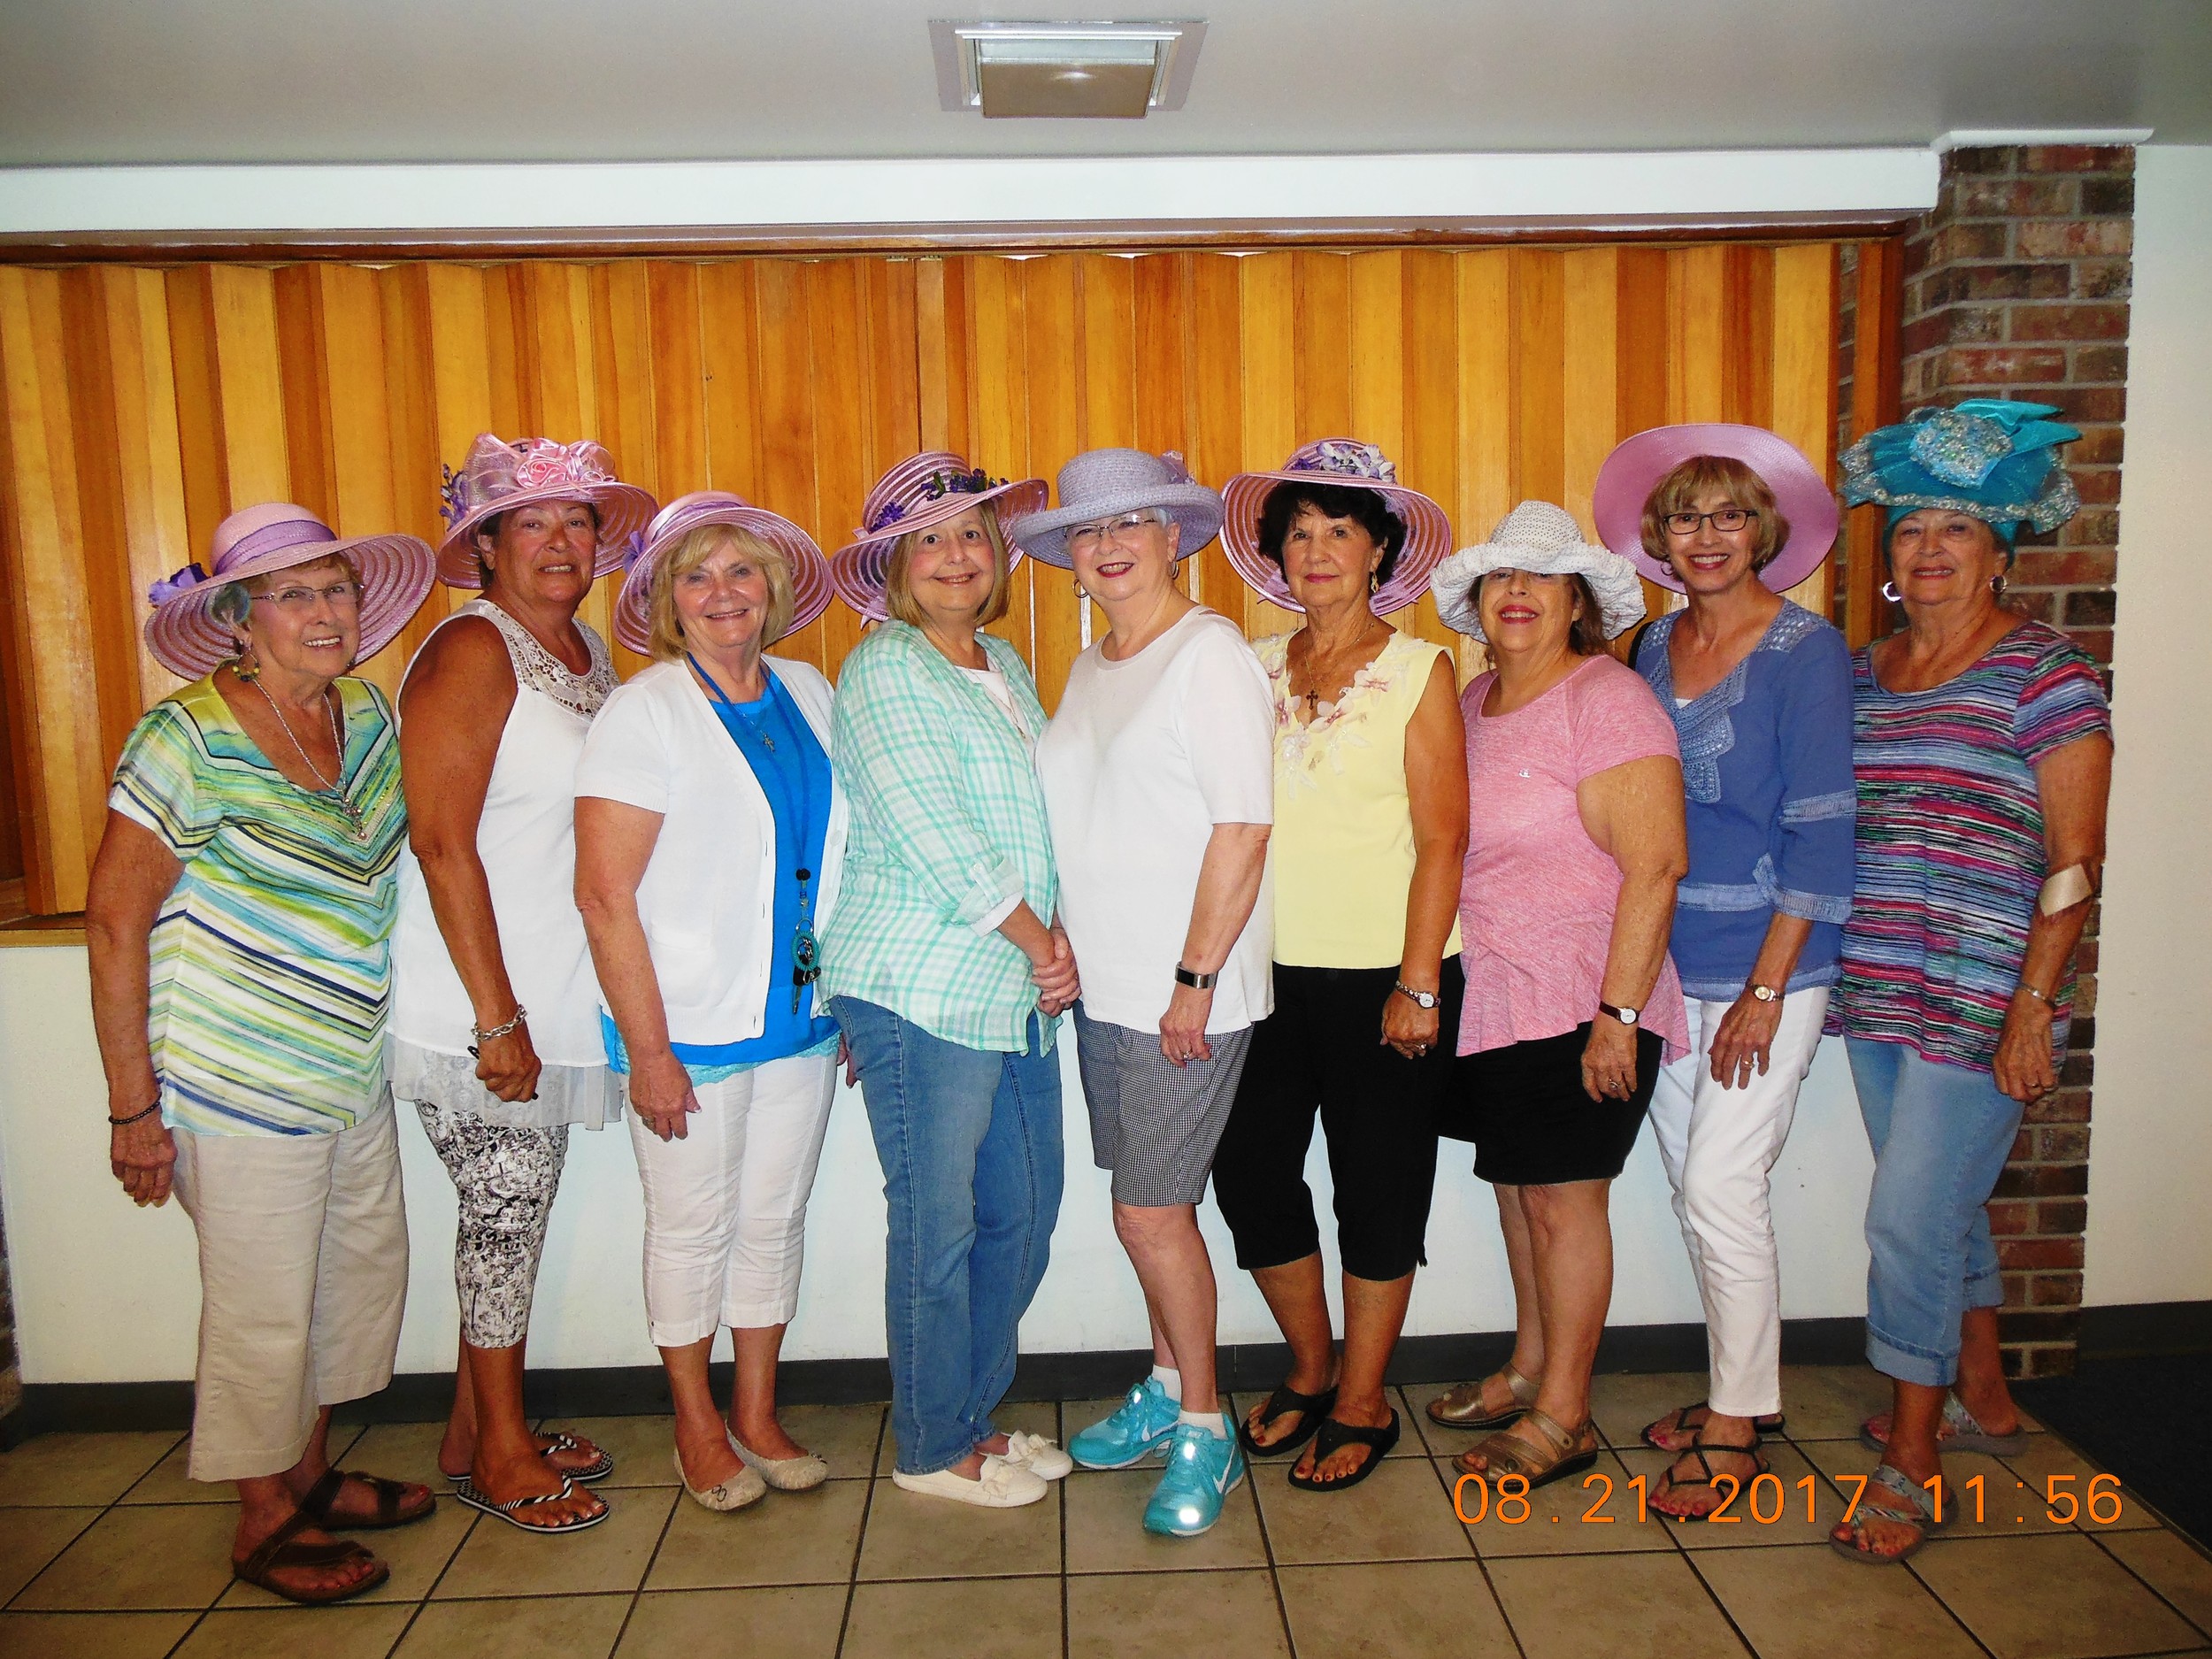 Pictured L-R: Board members decked out in hats ready for the 2018 Mad Hatters’ Event - Verna Coggins, Chris Anglin, Lore Ballow, Deborah Johnson, Sheila Morgan, Sylvia Womack, Linda Lambert, Kathleen Roberts, Barbara McCamish.